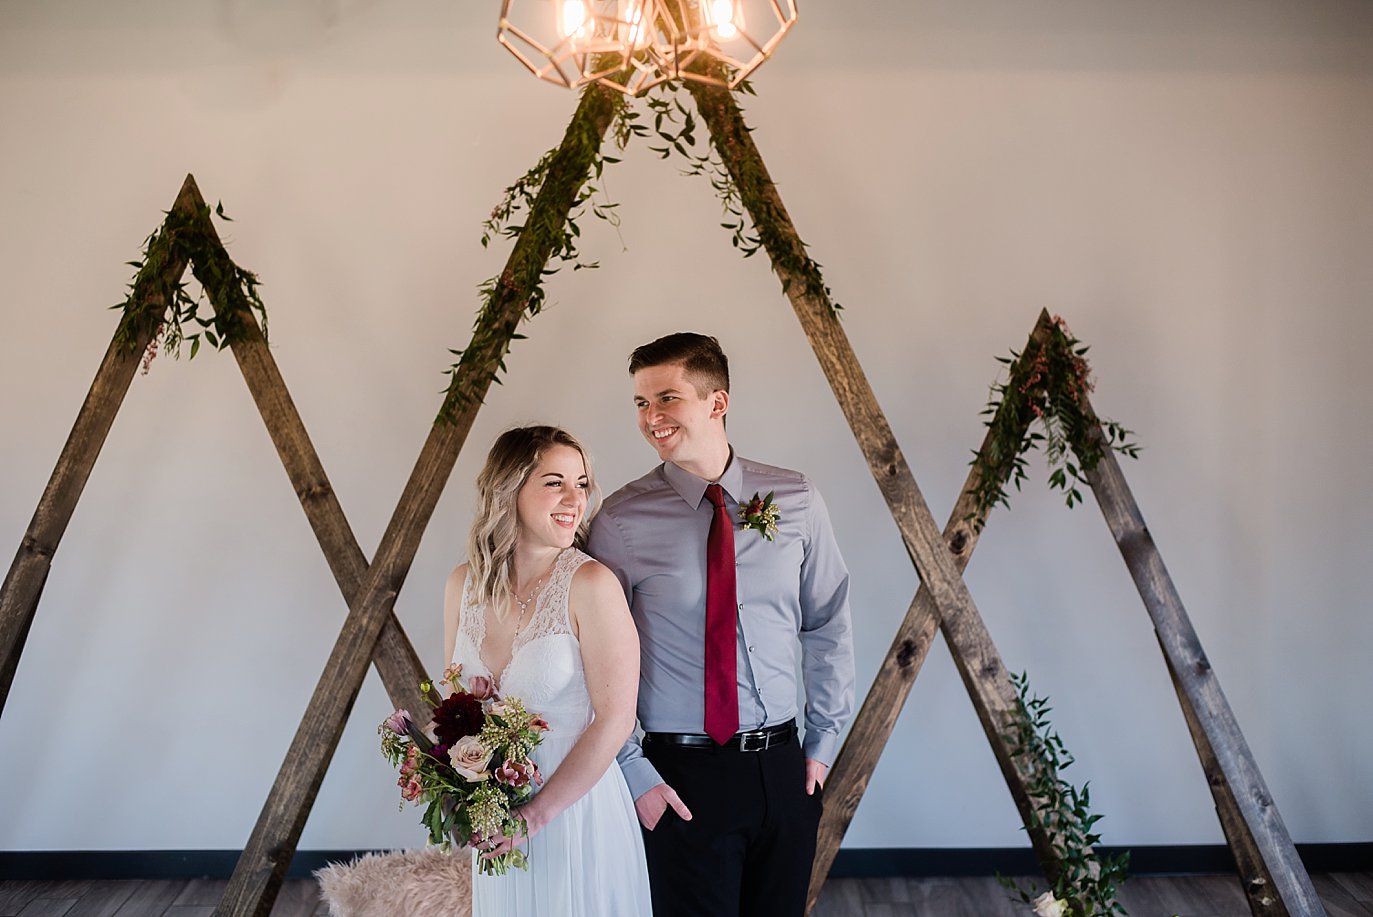 bride and groom in front of wooden mountain ceremony arch at Northgate Event Center wedding by Thornton wedding photographer Jennie Crate